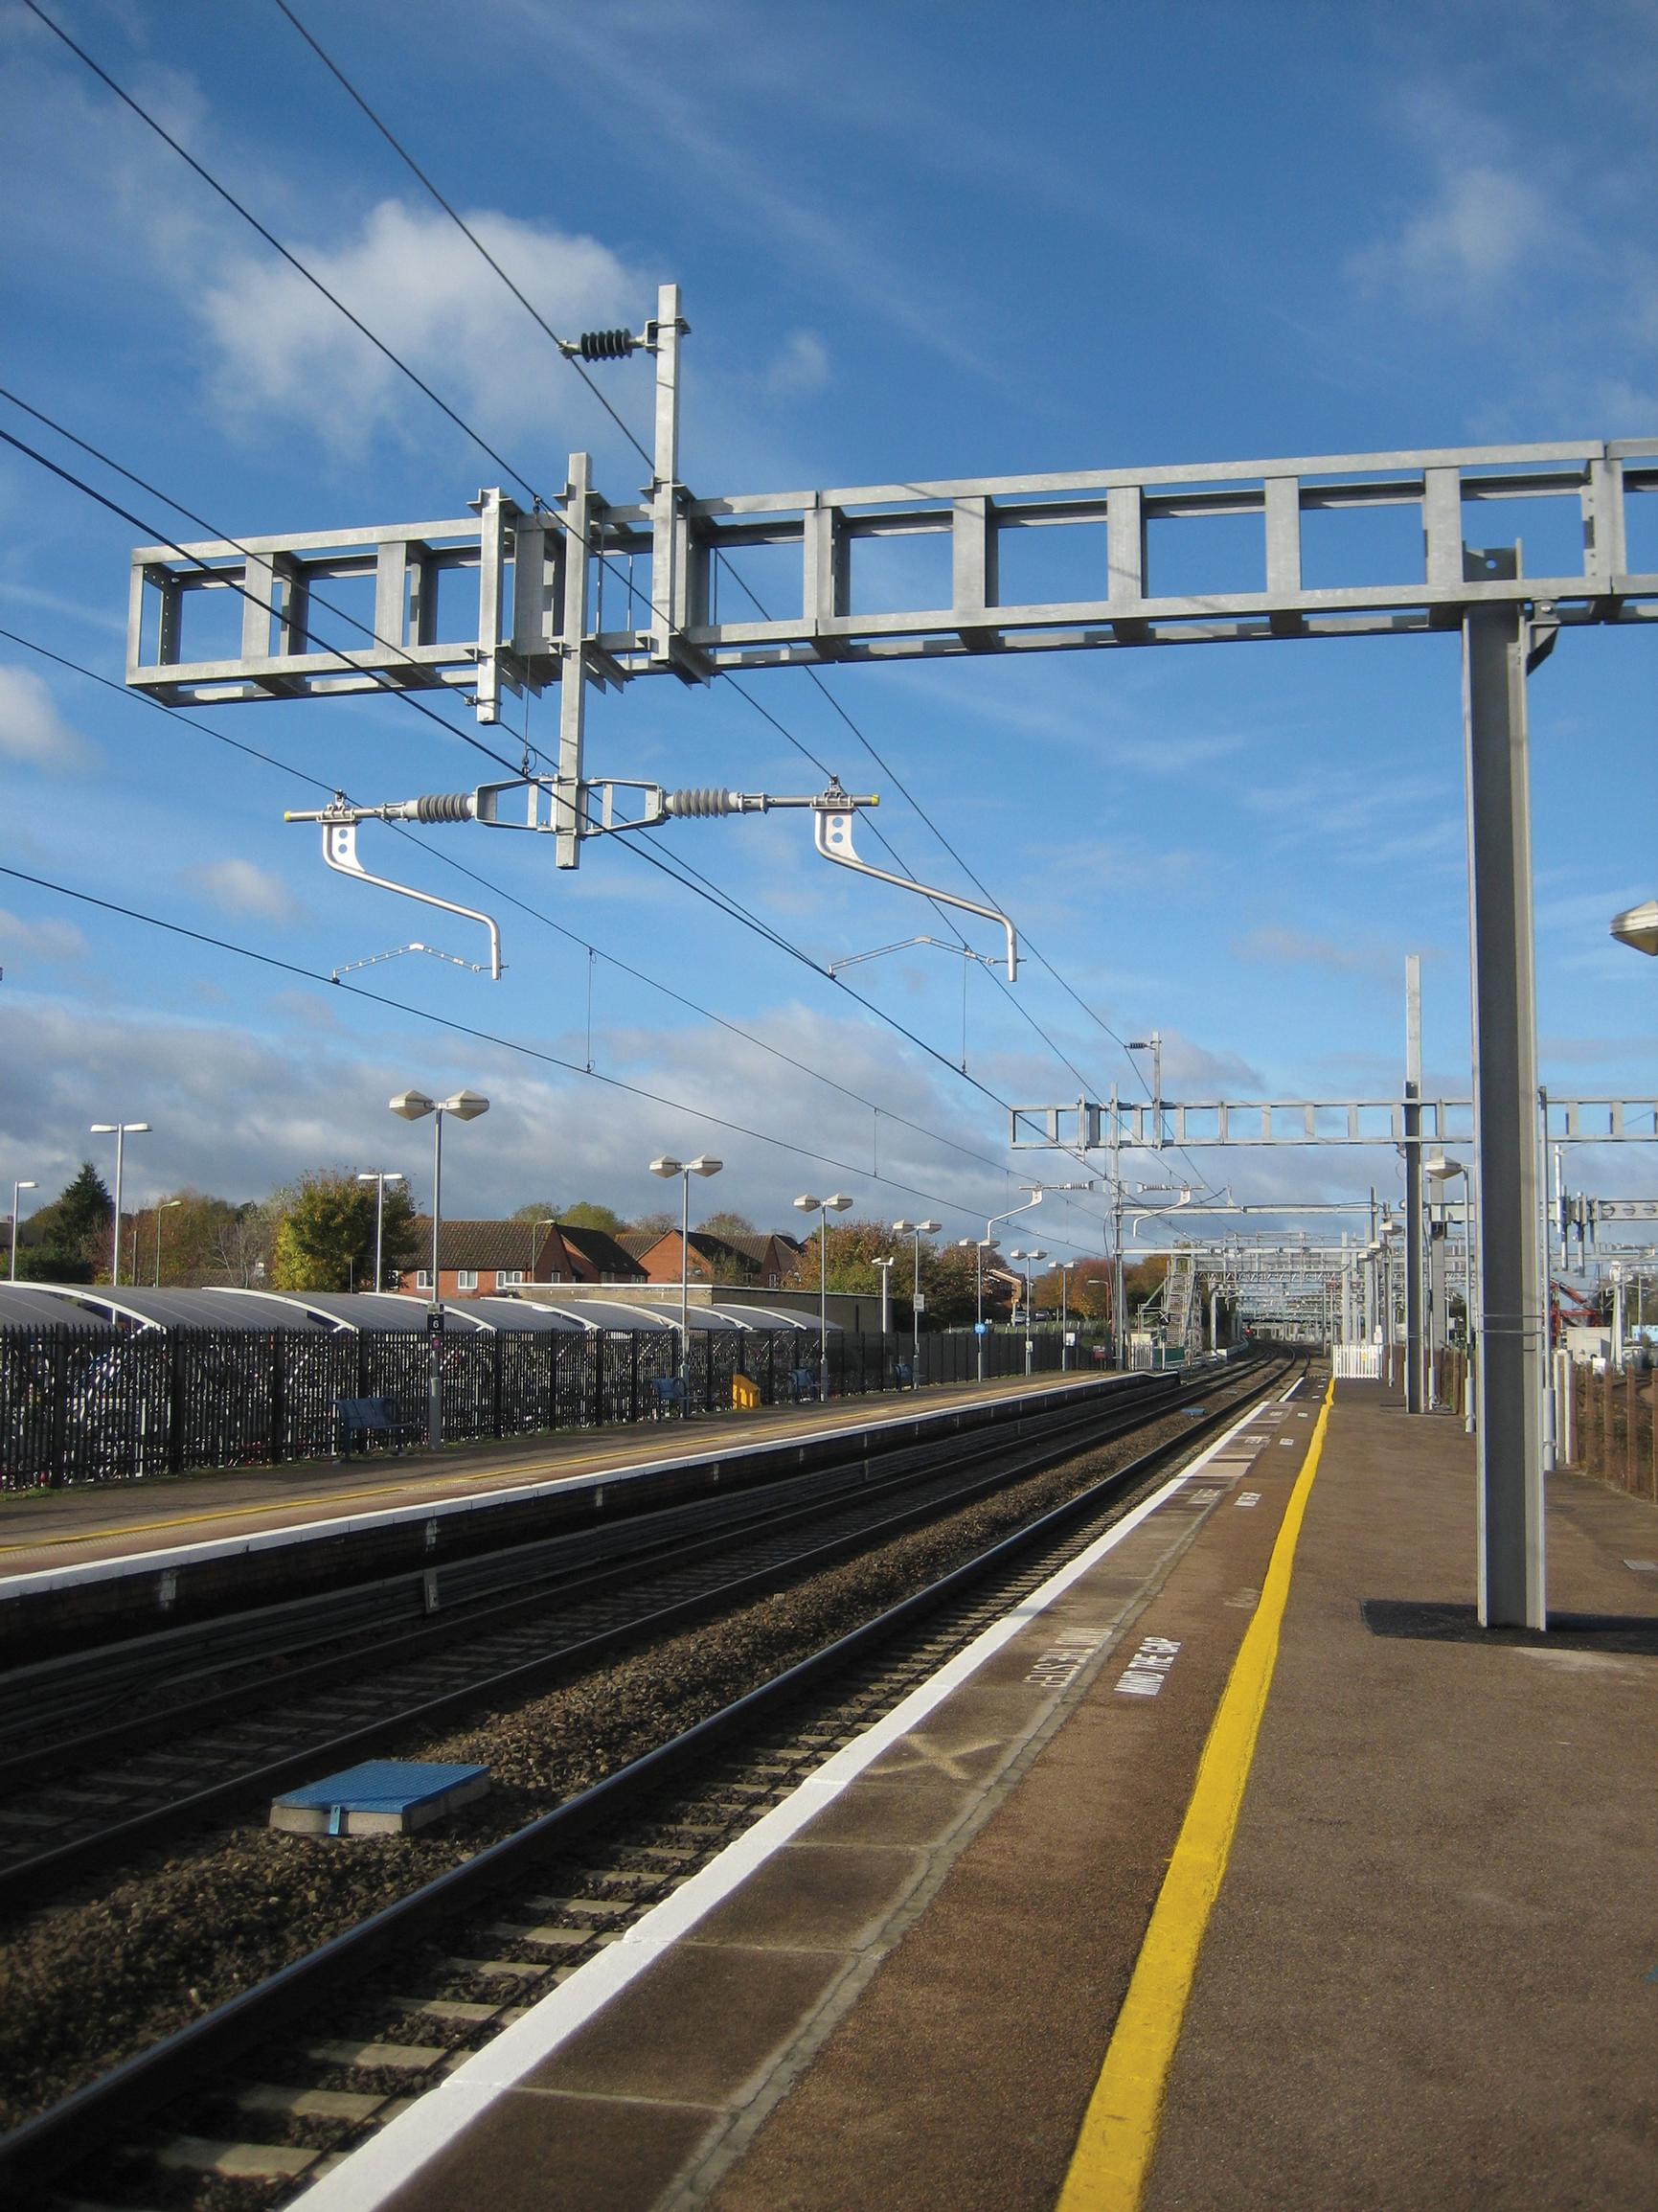 Electrification has so far only been completed between Reading and Didcot